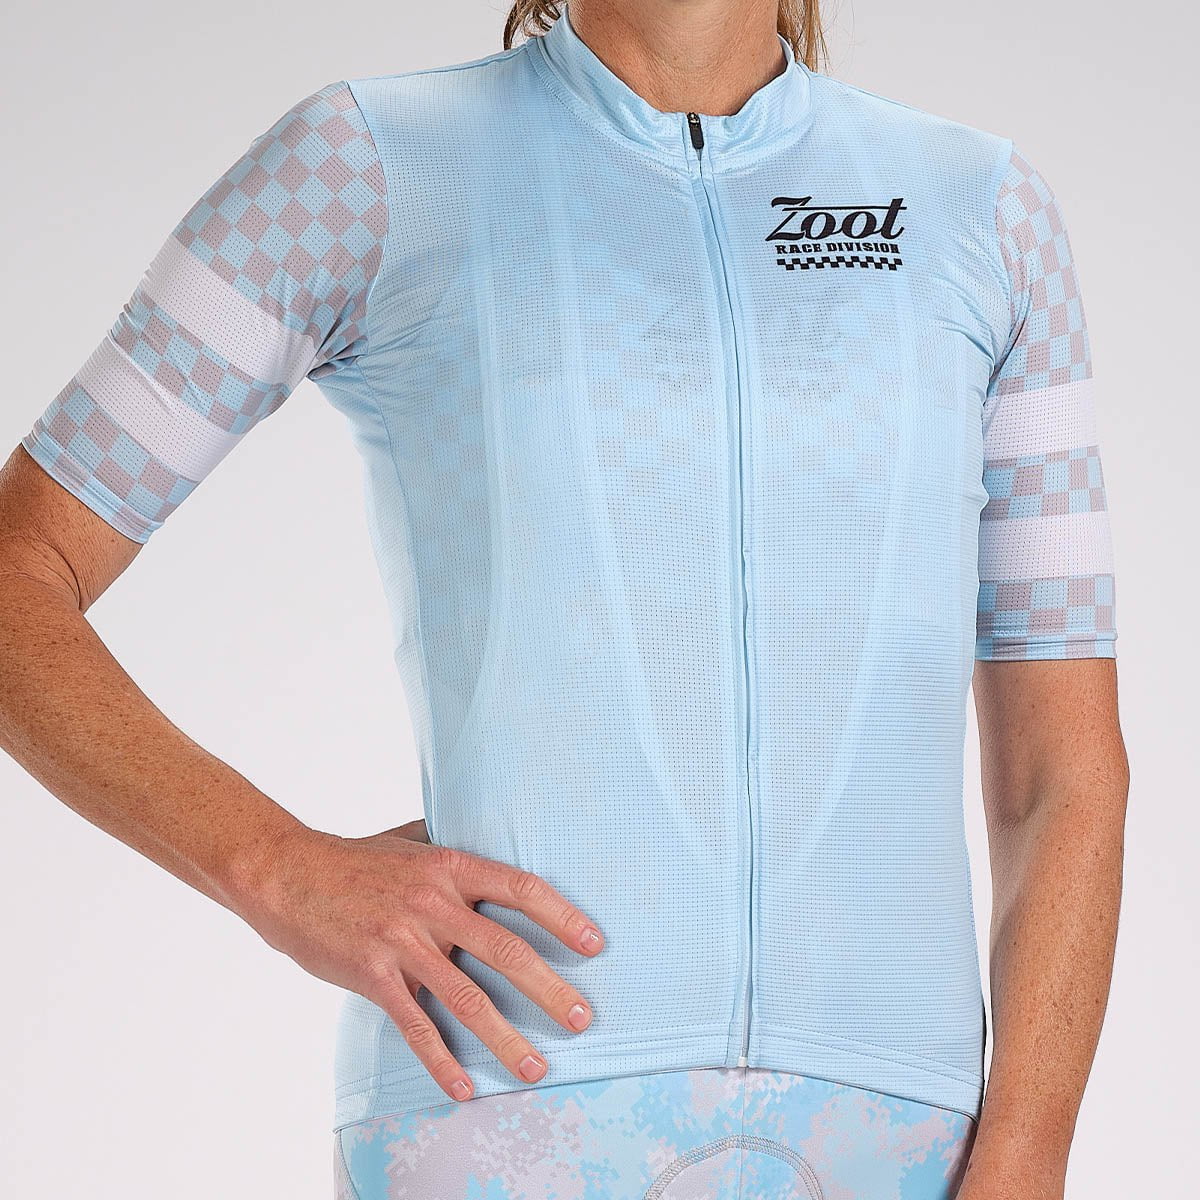 Zoot Sports CYCLE TOPS WOMENS LTD CYCLE AERO JERSEY - RACE DIVISION